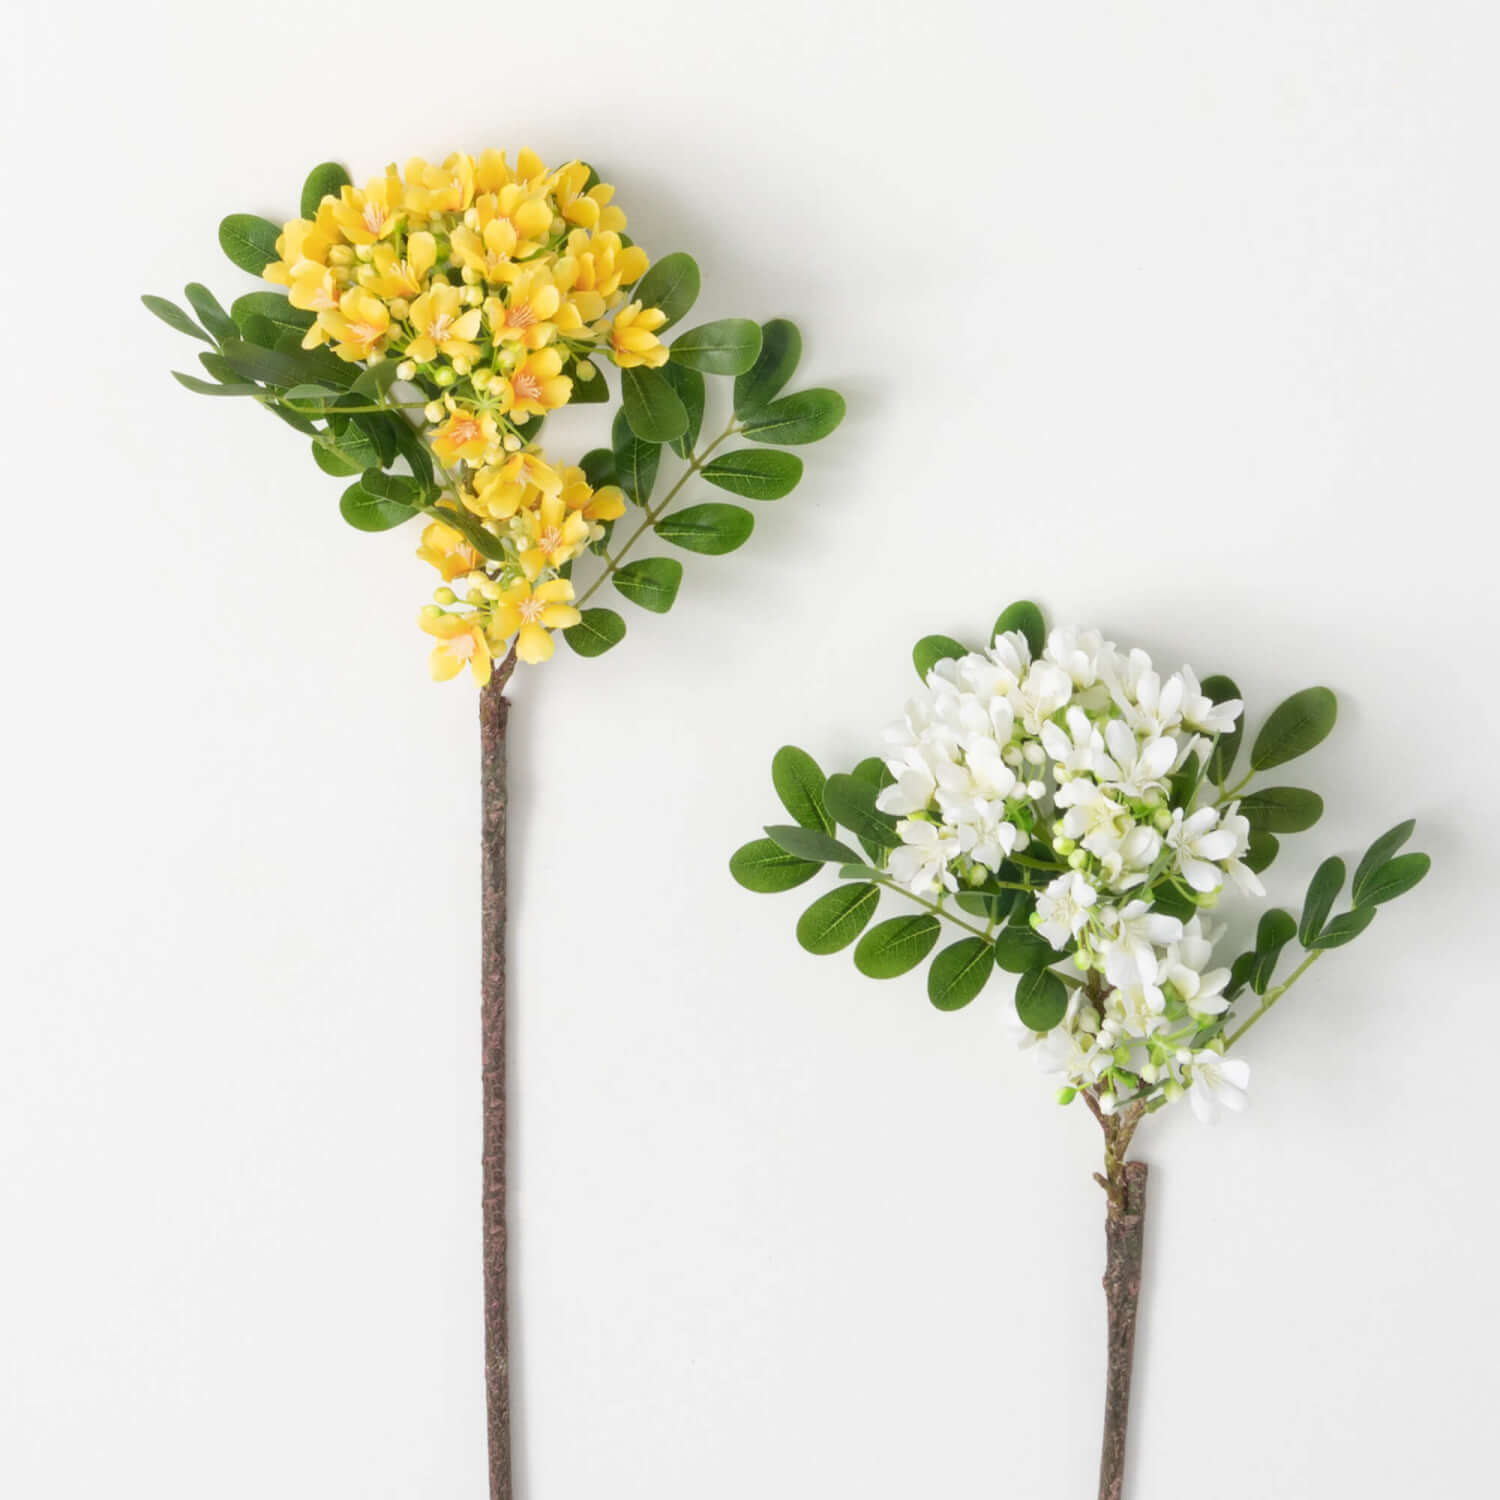 artificial flowers on white background.